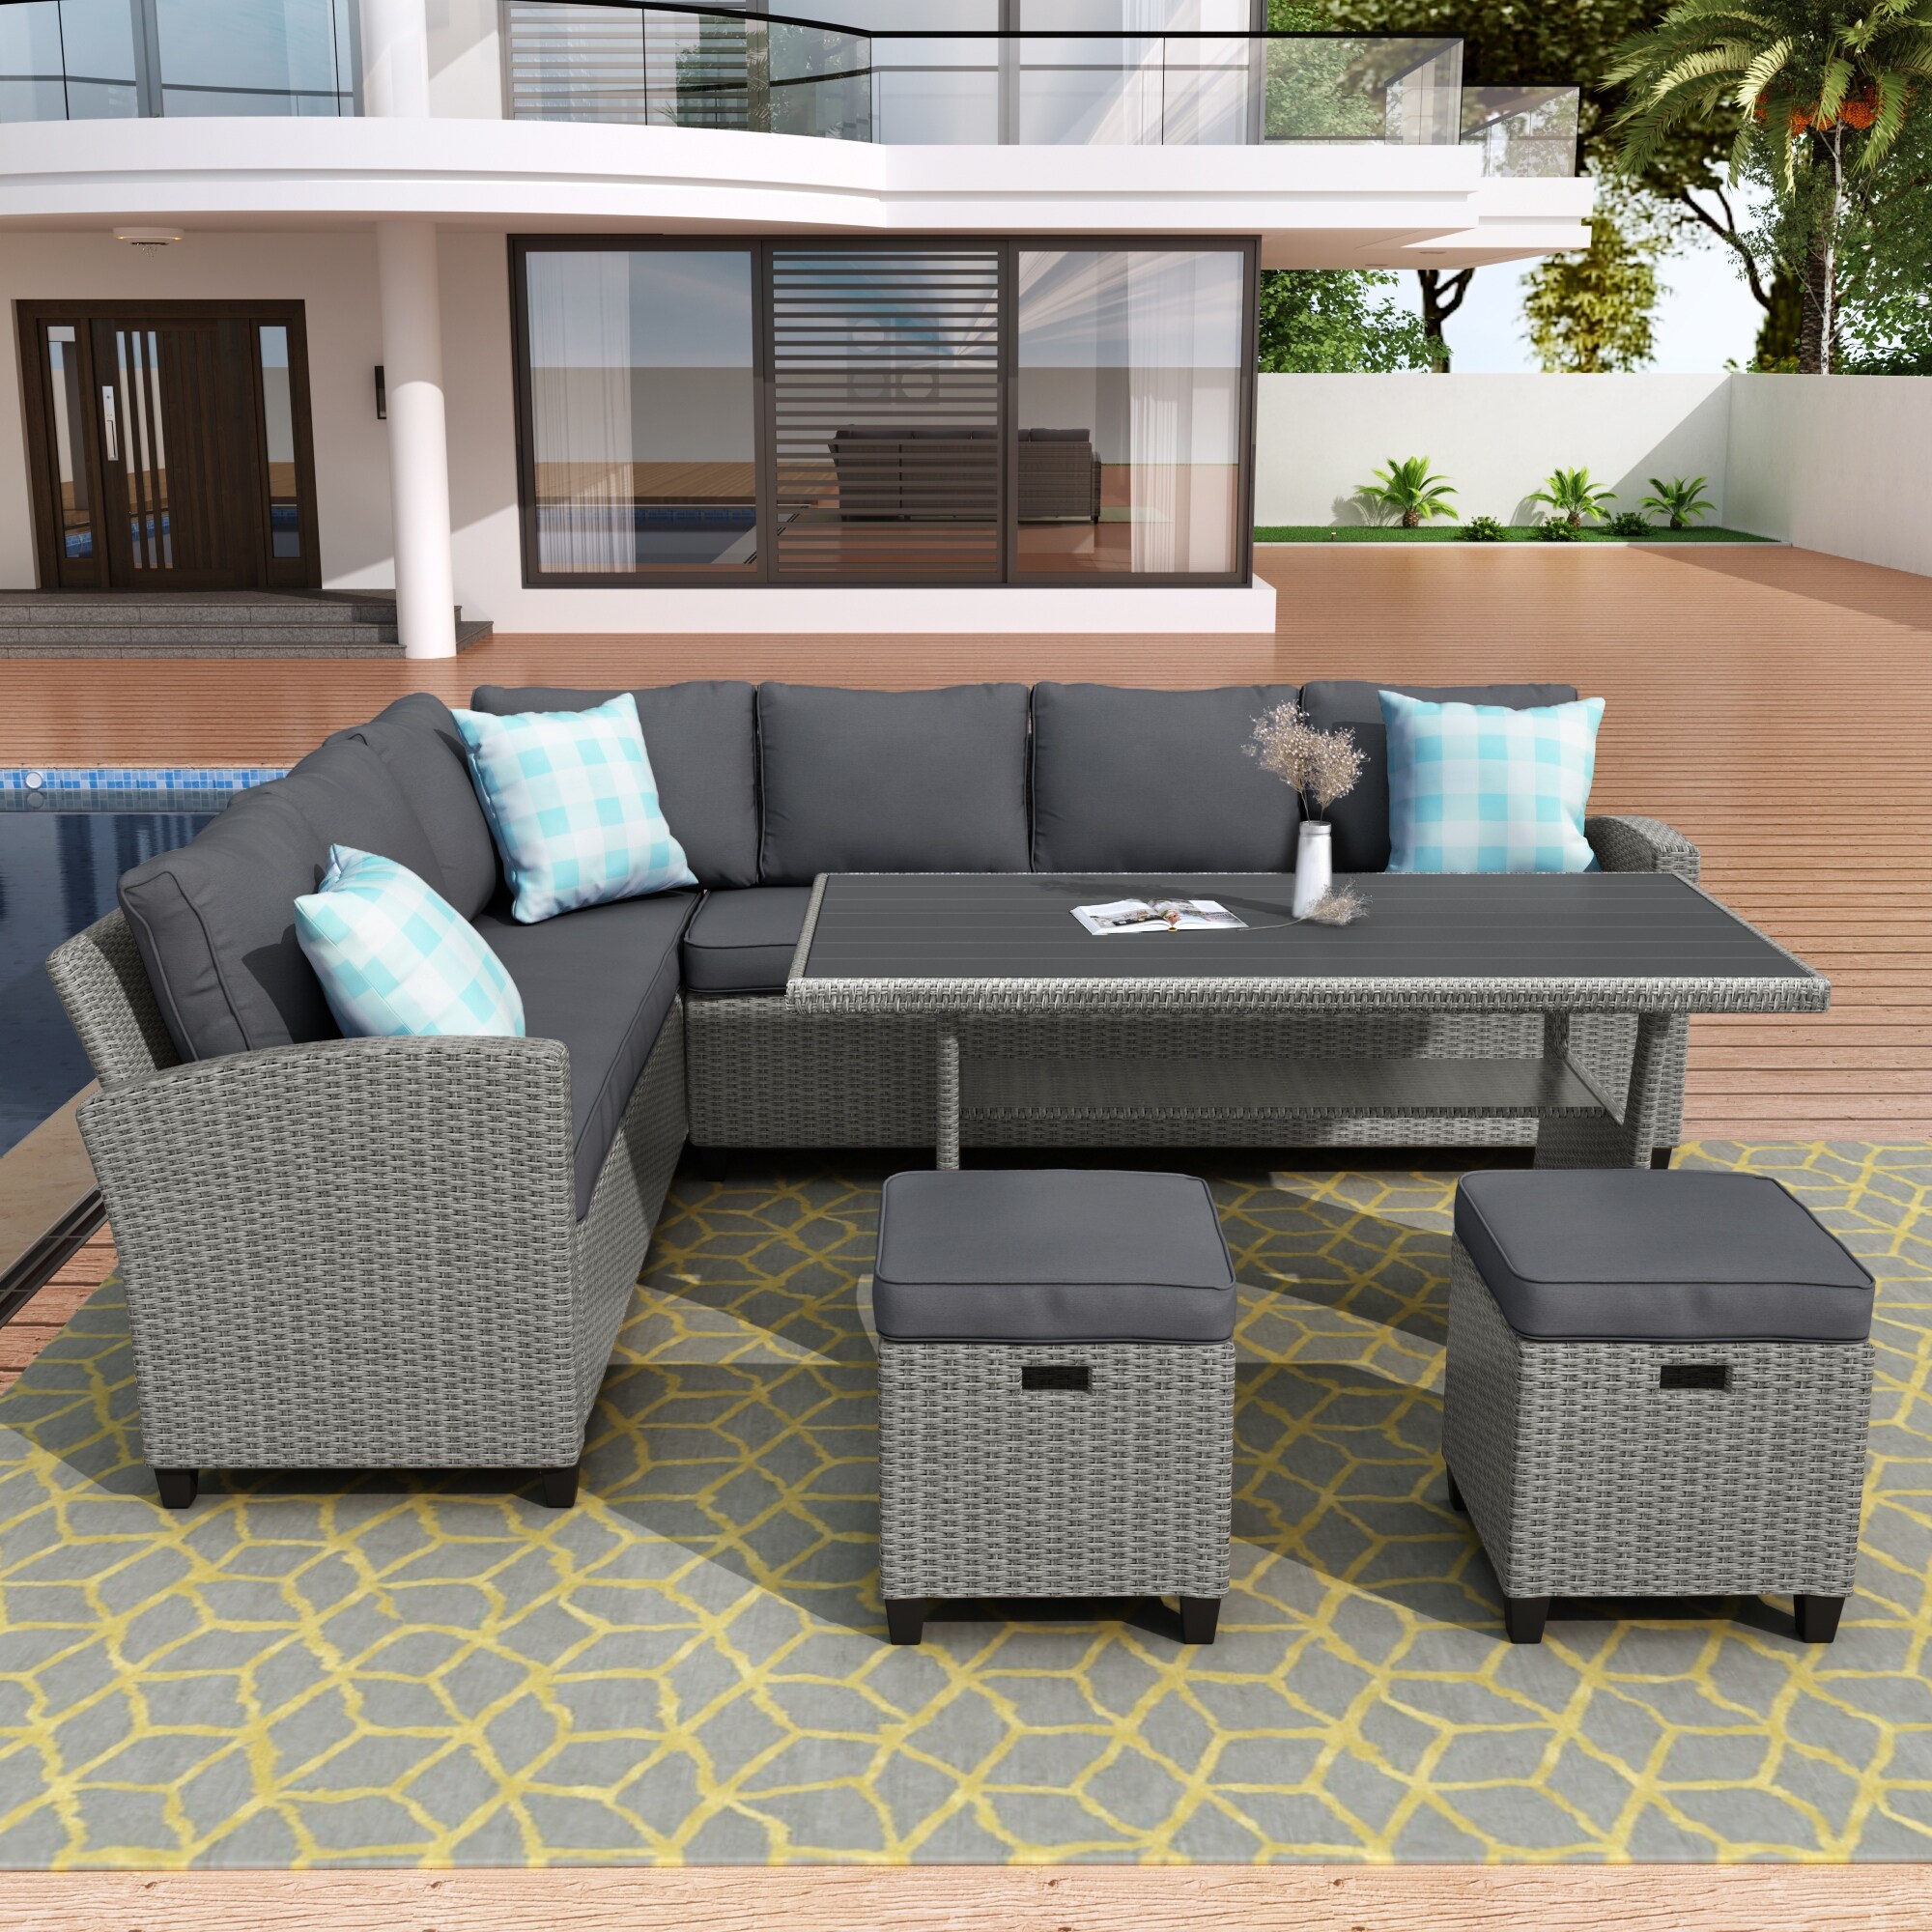 5 Piece Outdoor Conversation Set With Dining Table and Ottoman  Pe Rattan Furniture Set With Throw Pillows For Garden  Backyard